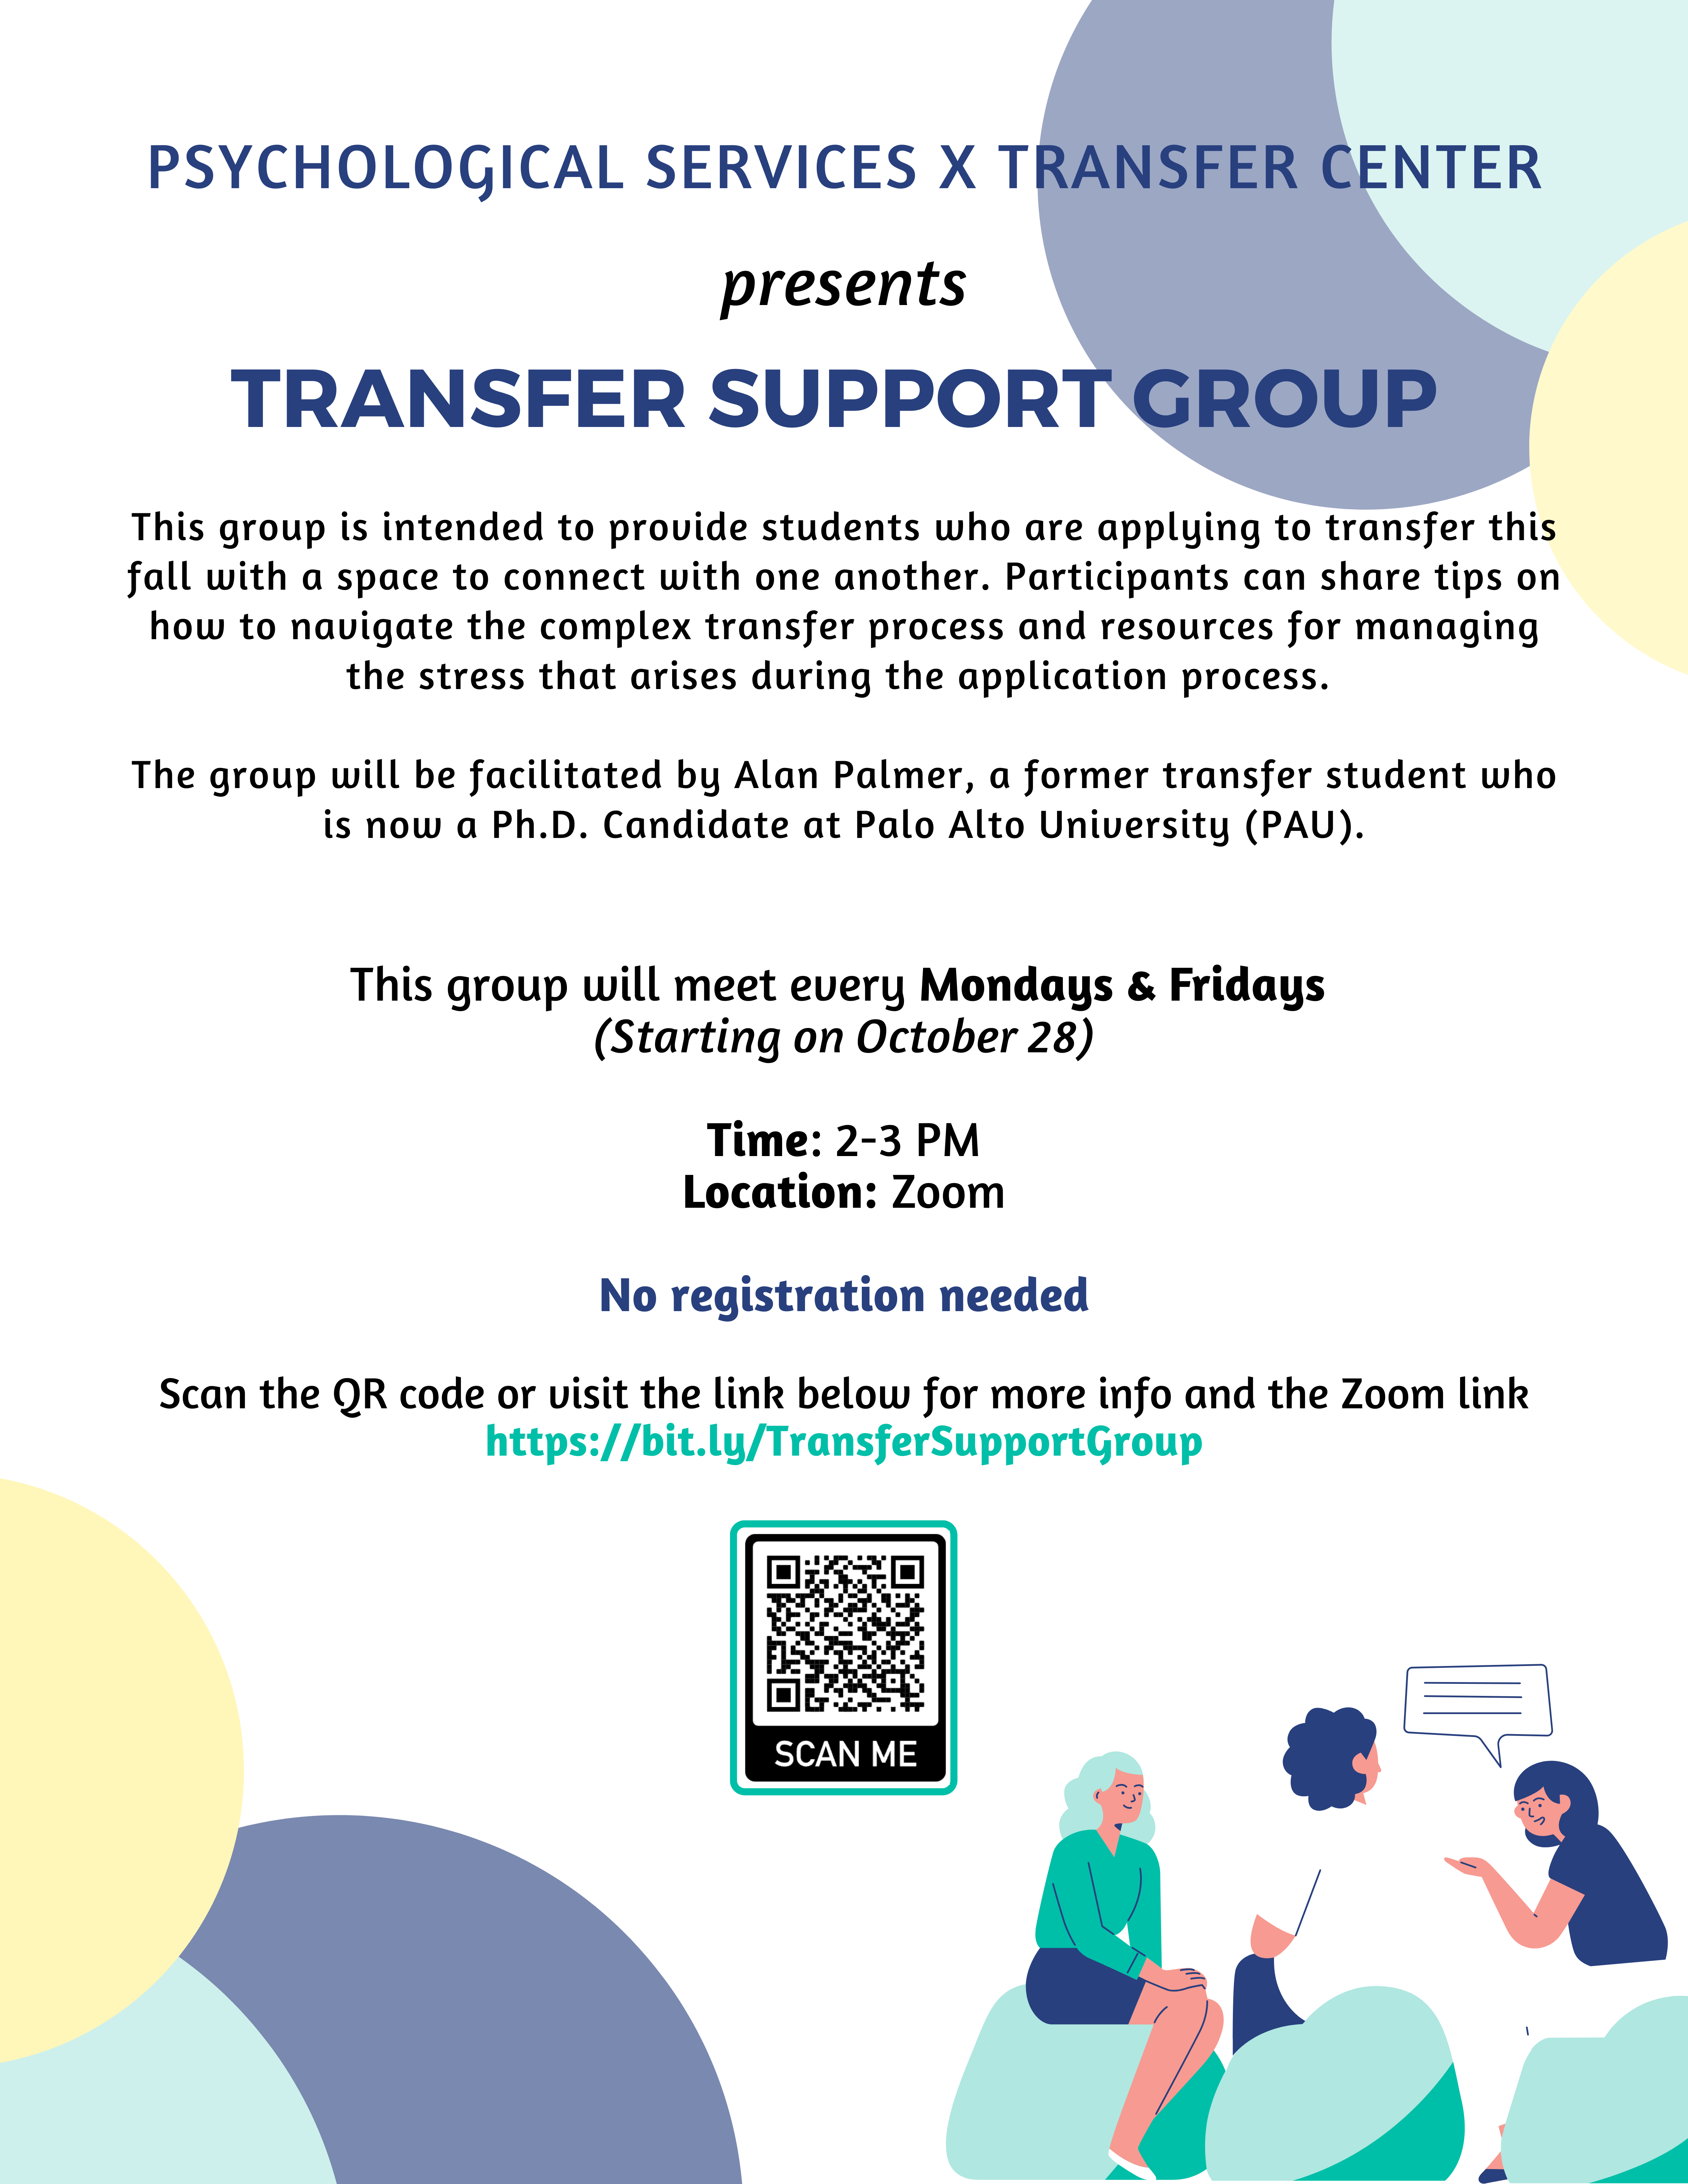 Flyer for Transfer Support Group